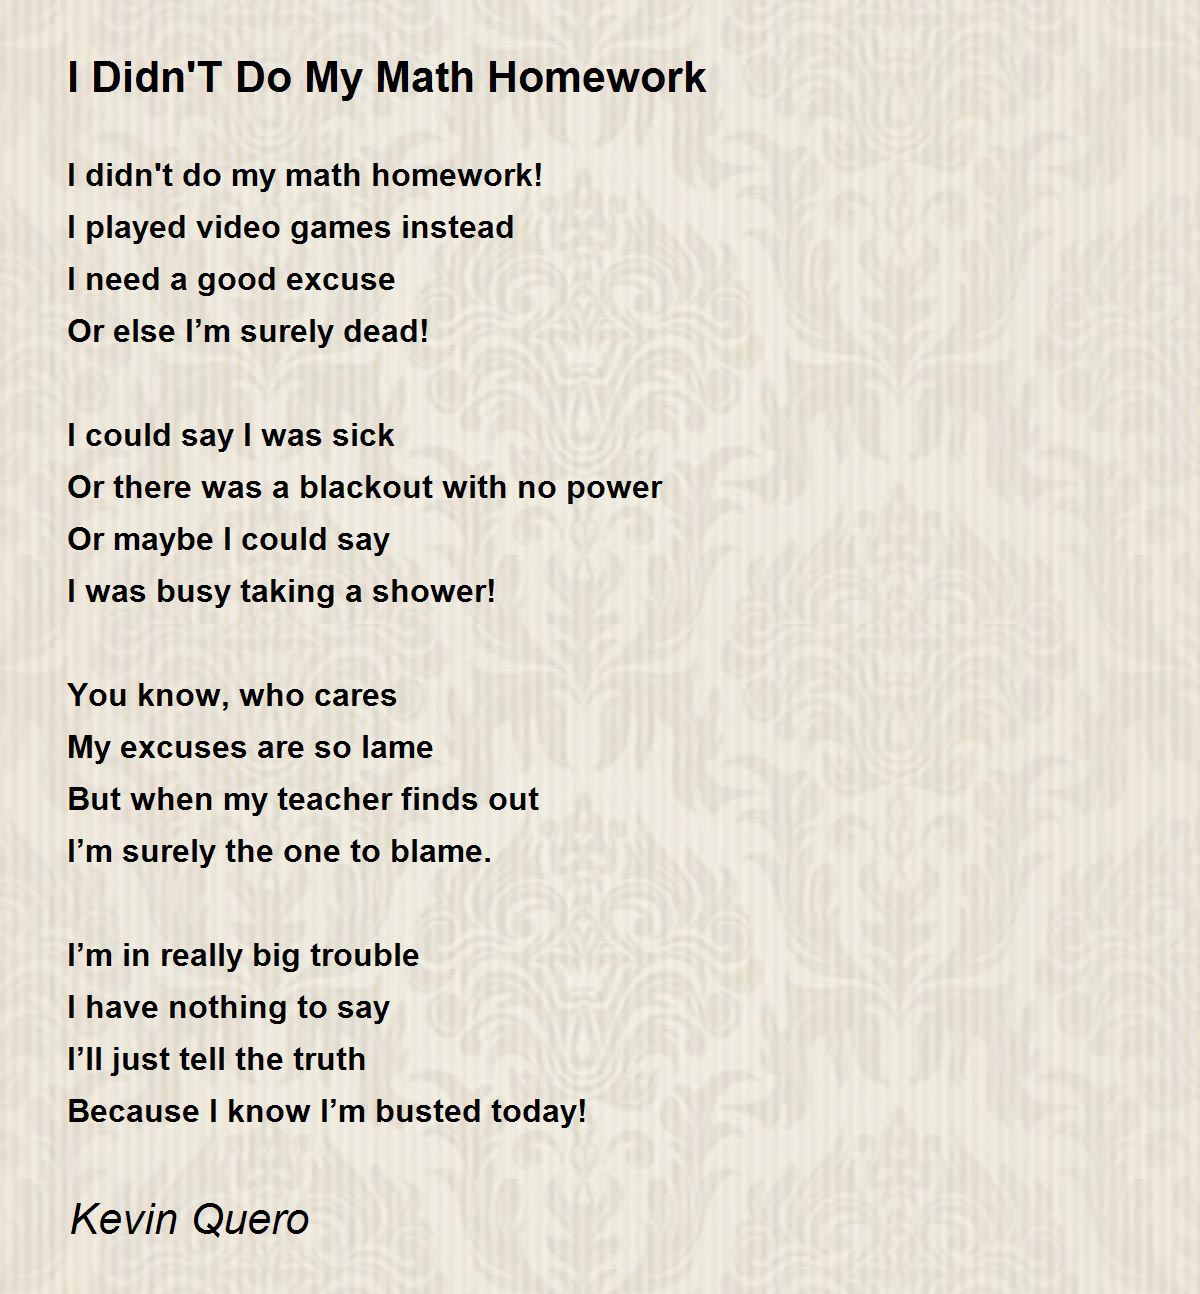 i don't want to do my homework poem